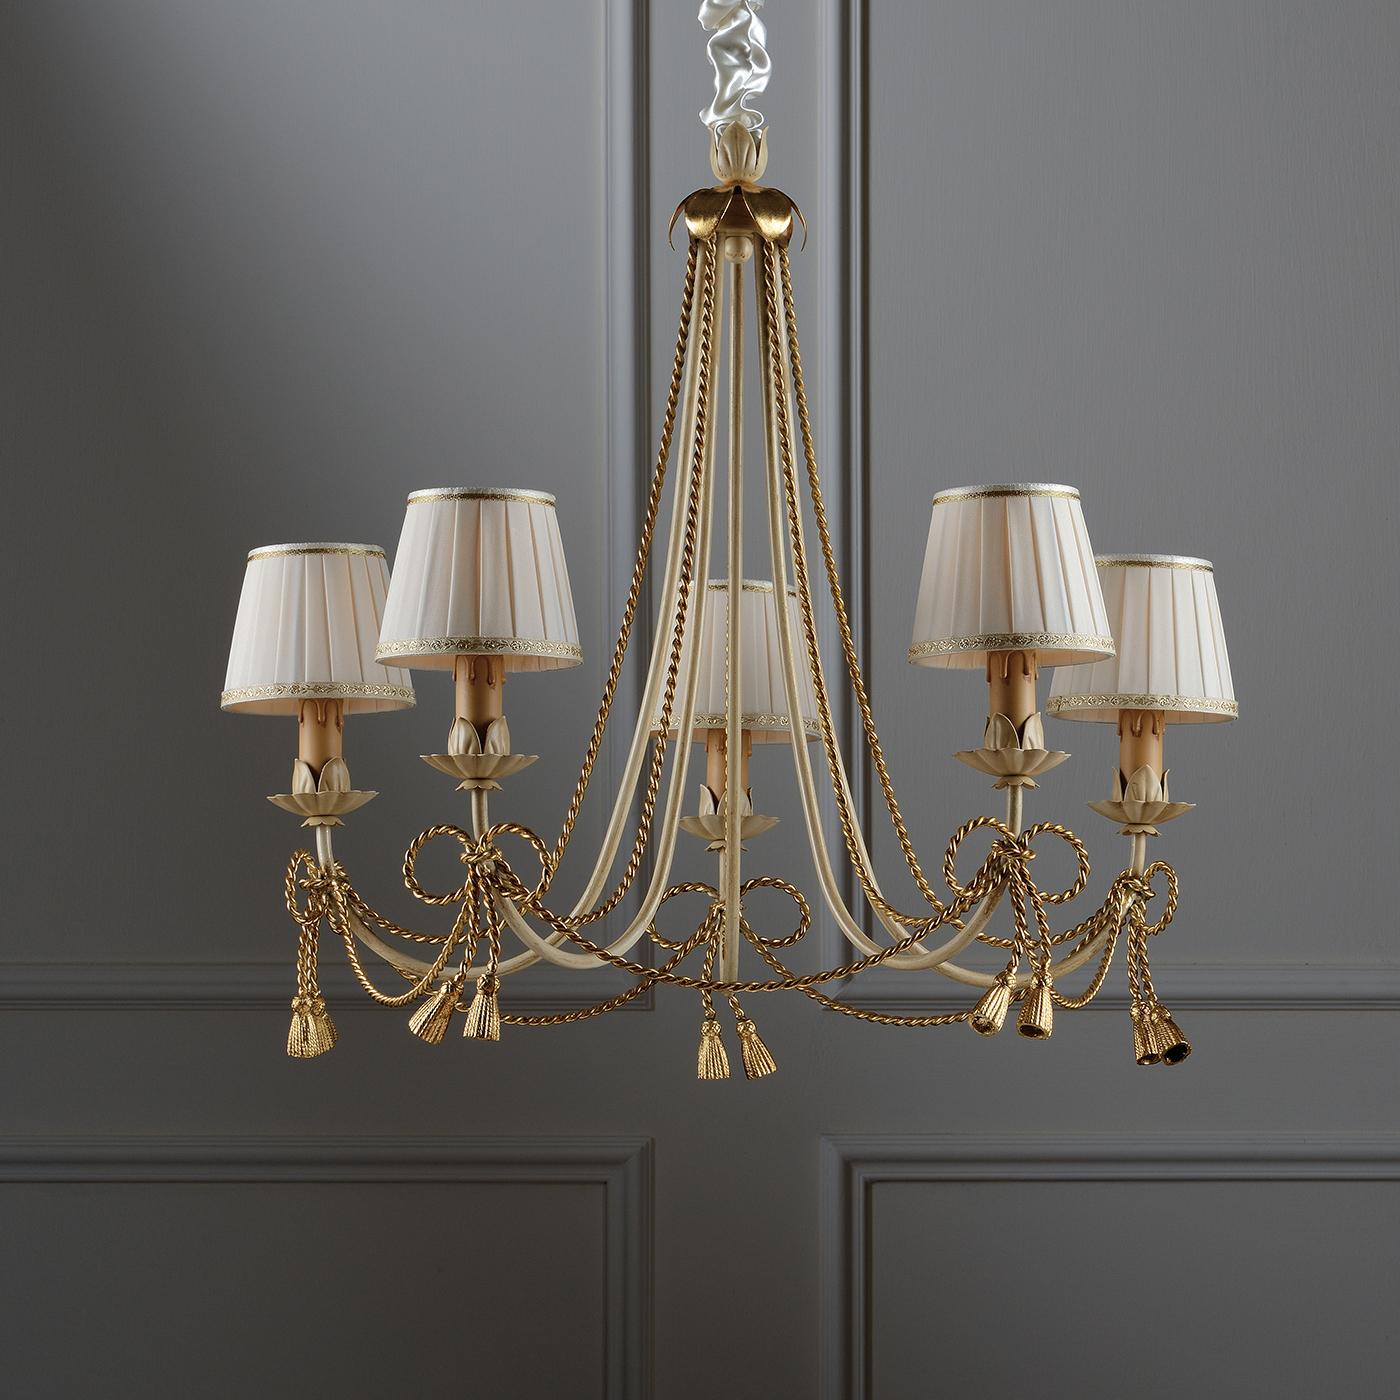 This is a majestic chandelier characterized by its ivory-colored metal structure that is further enhanced by details in gold leaf. It provides a fantastic and uniform illumination with 5 lights, all covered by deluxe lampshades in ivory-colored